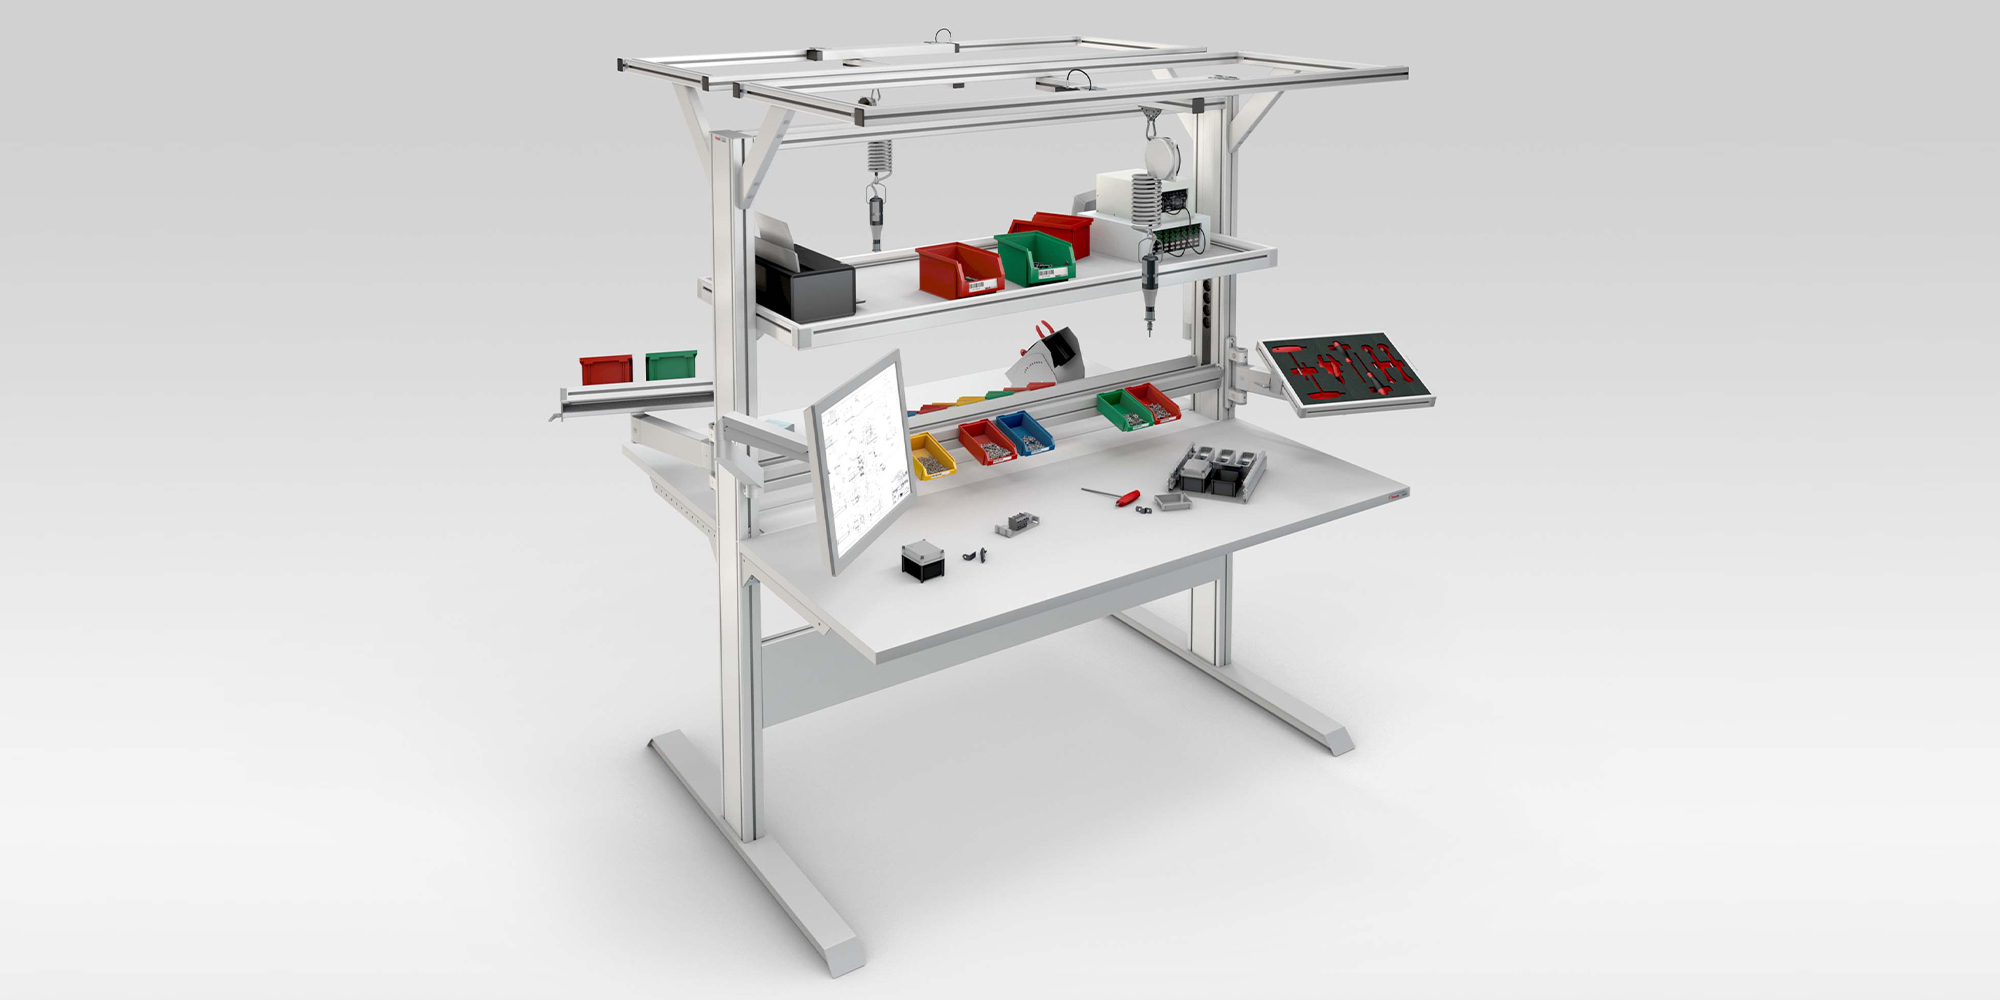 Overview of work bench design in production